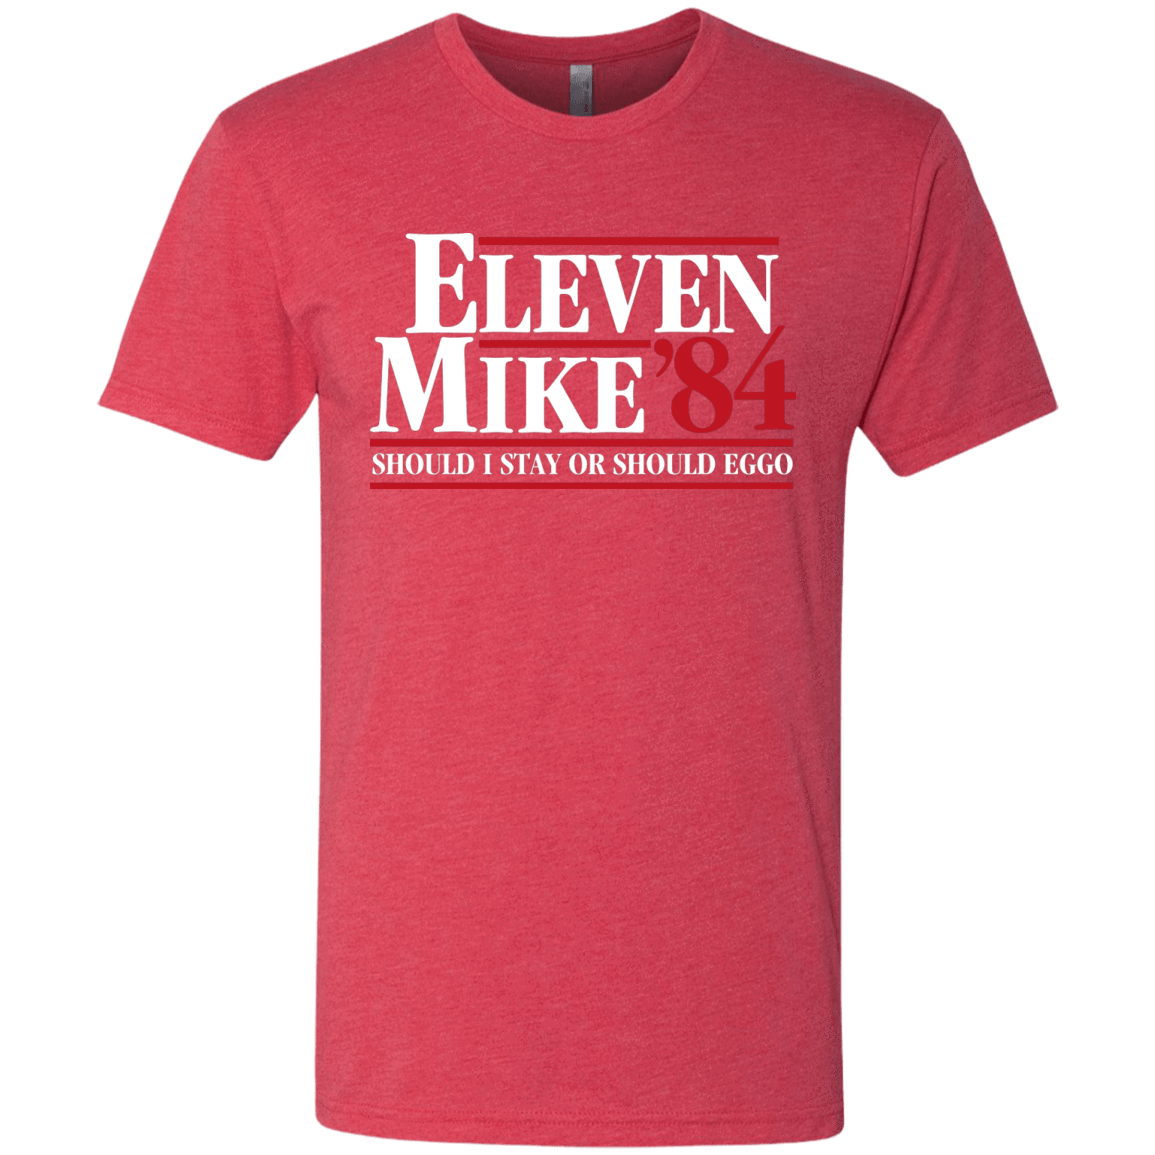 T-Shirts Vintage Red / Small Eleven Mike 84 - Should I Stay or Should Eggo Men's Triblend T-Shirt